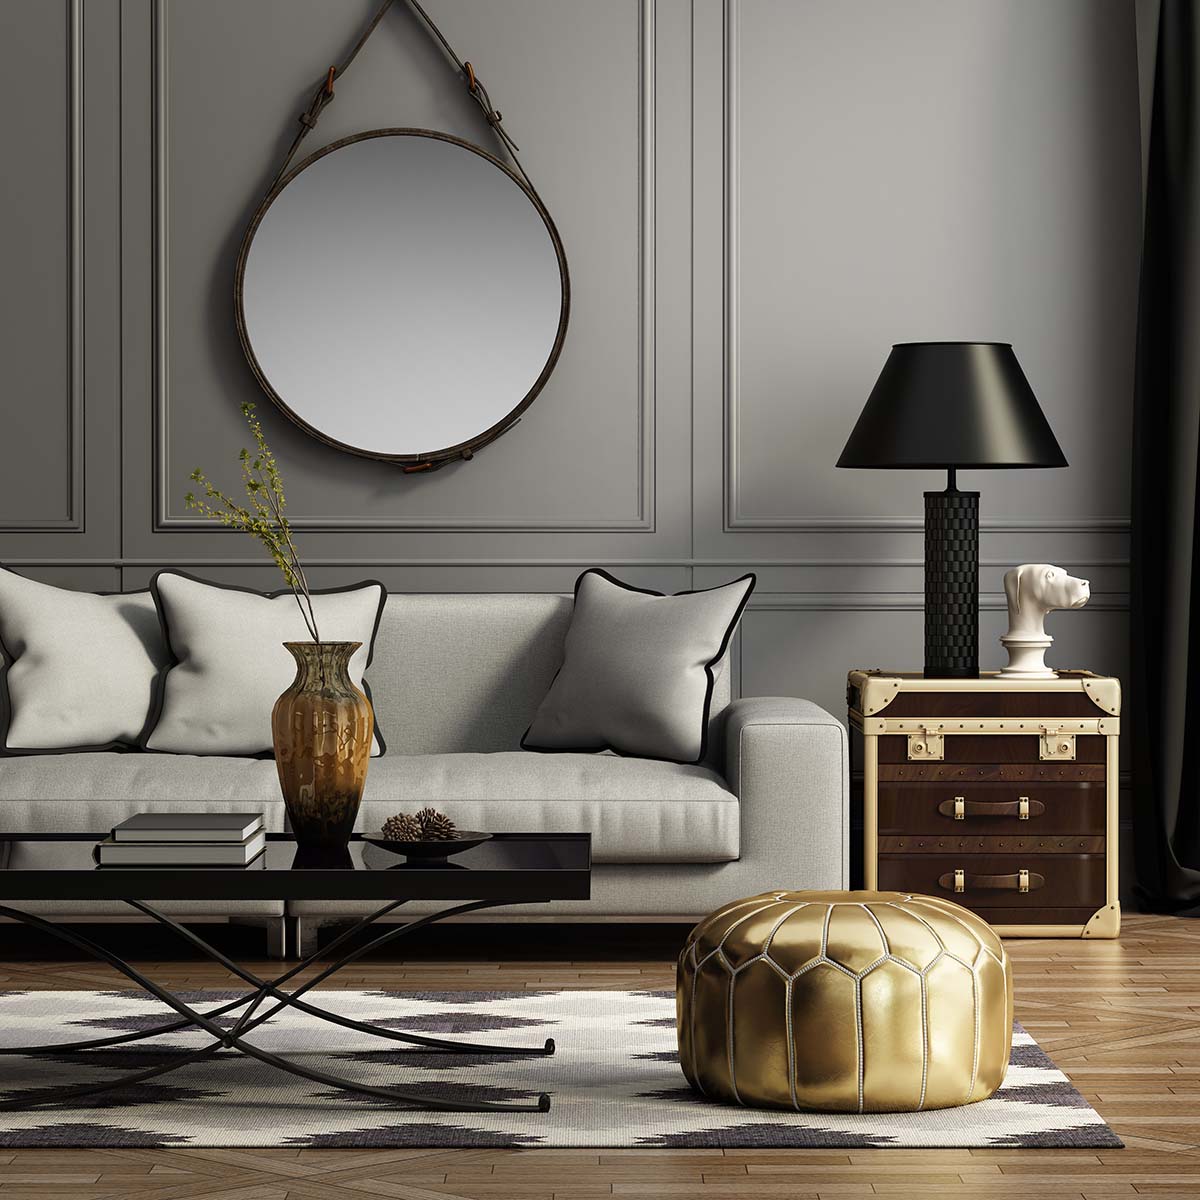 Selecting the right elements of décor